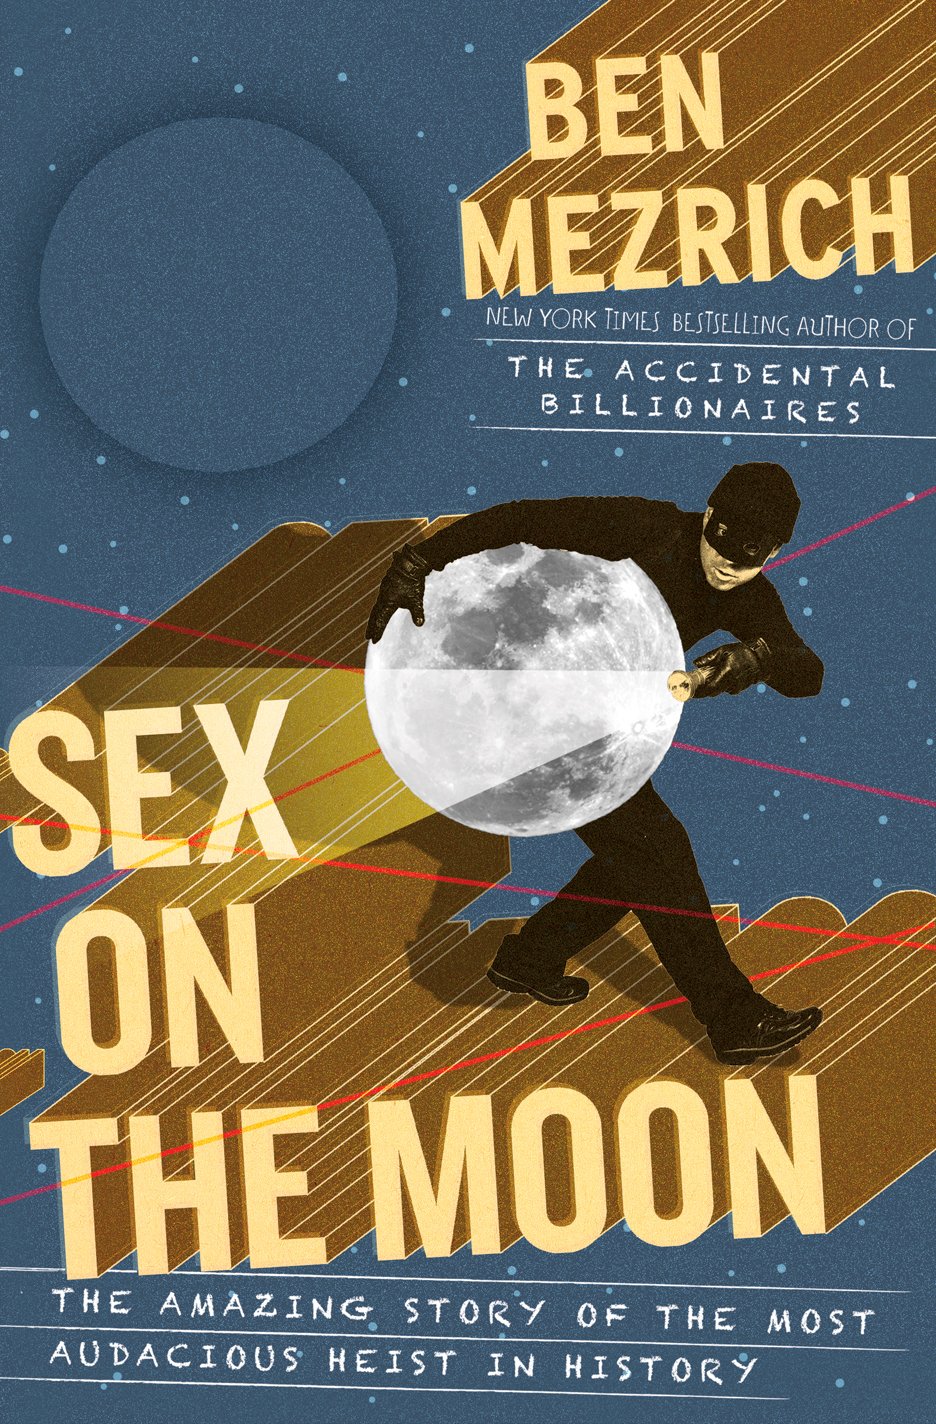 updated sex on the moon.jpg